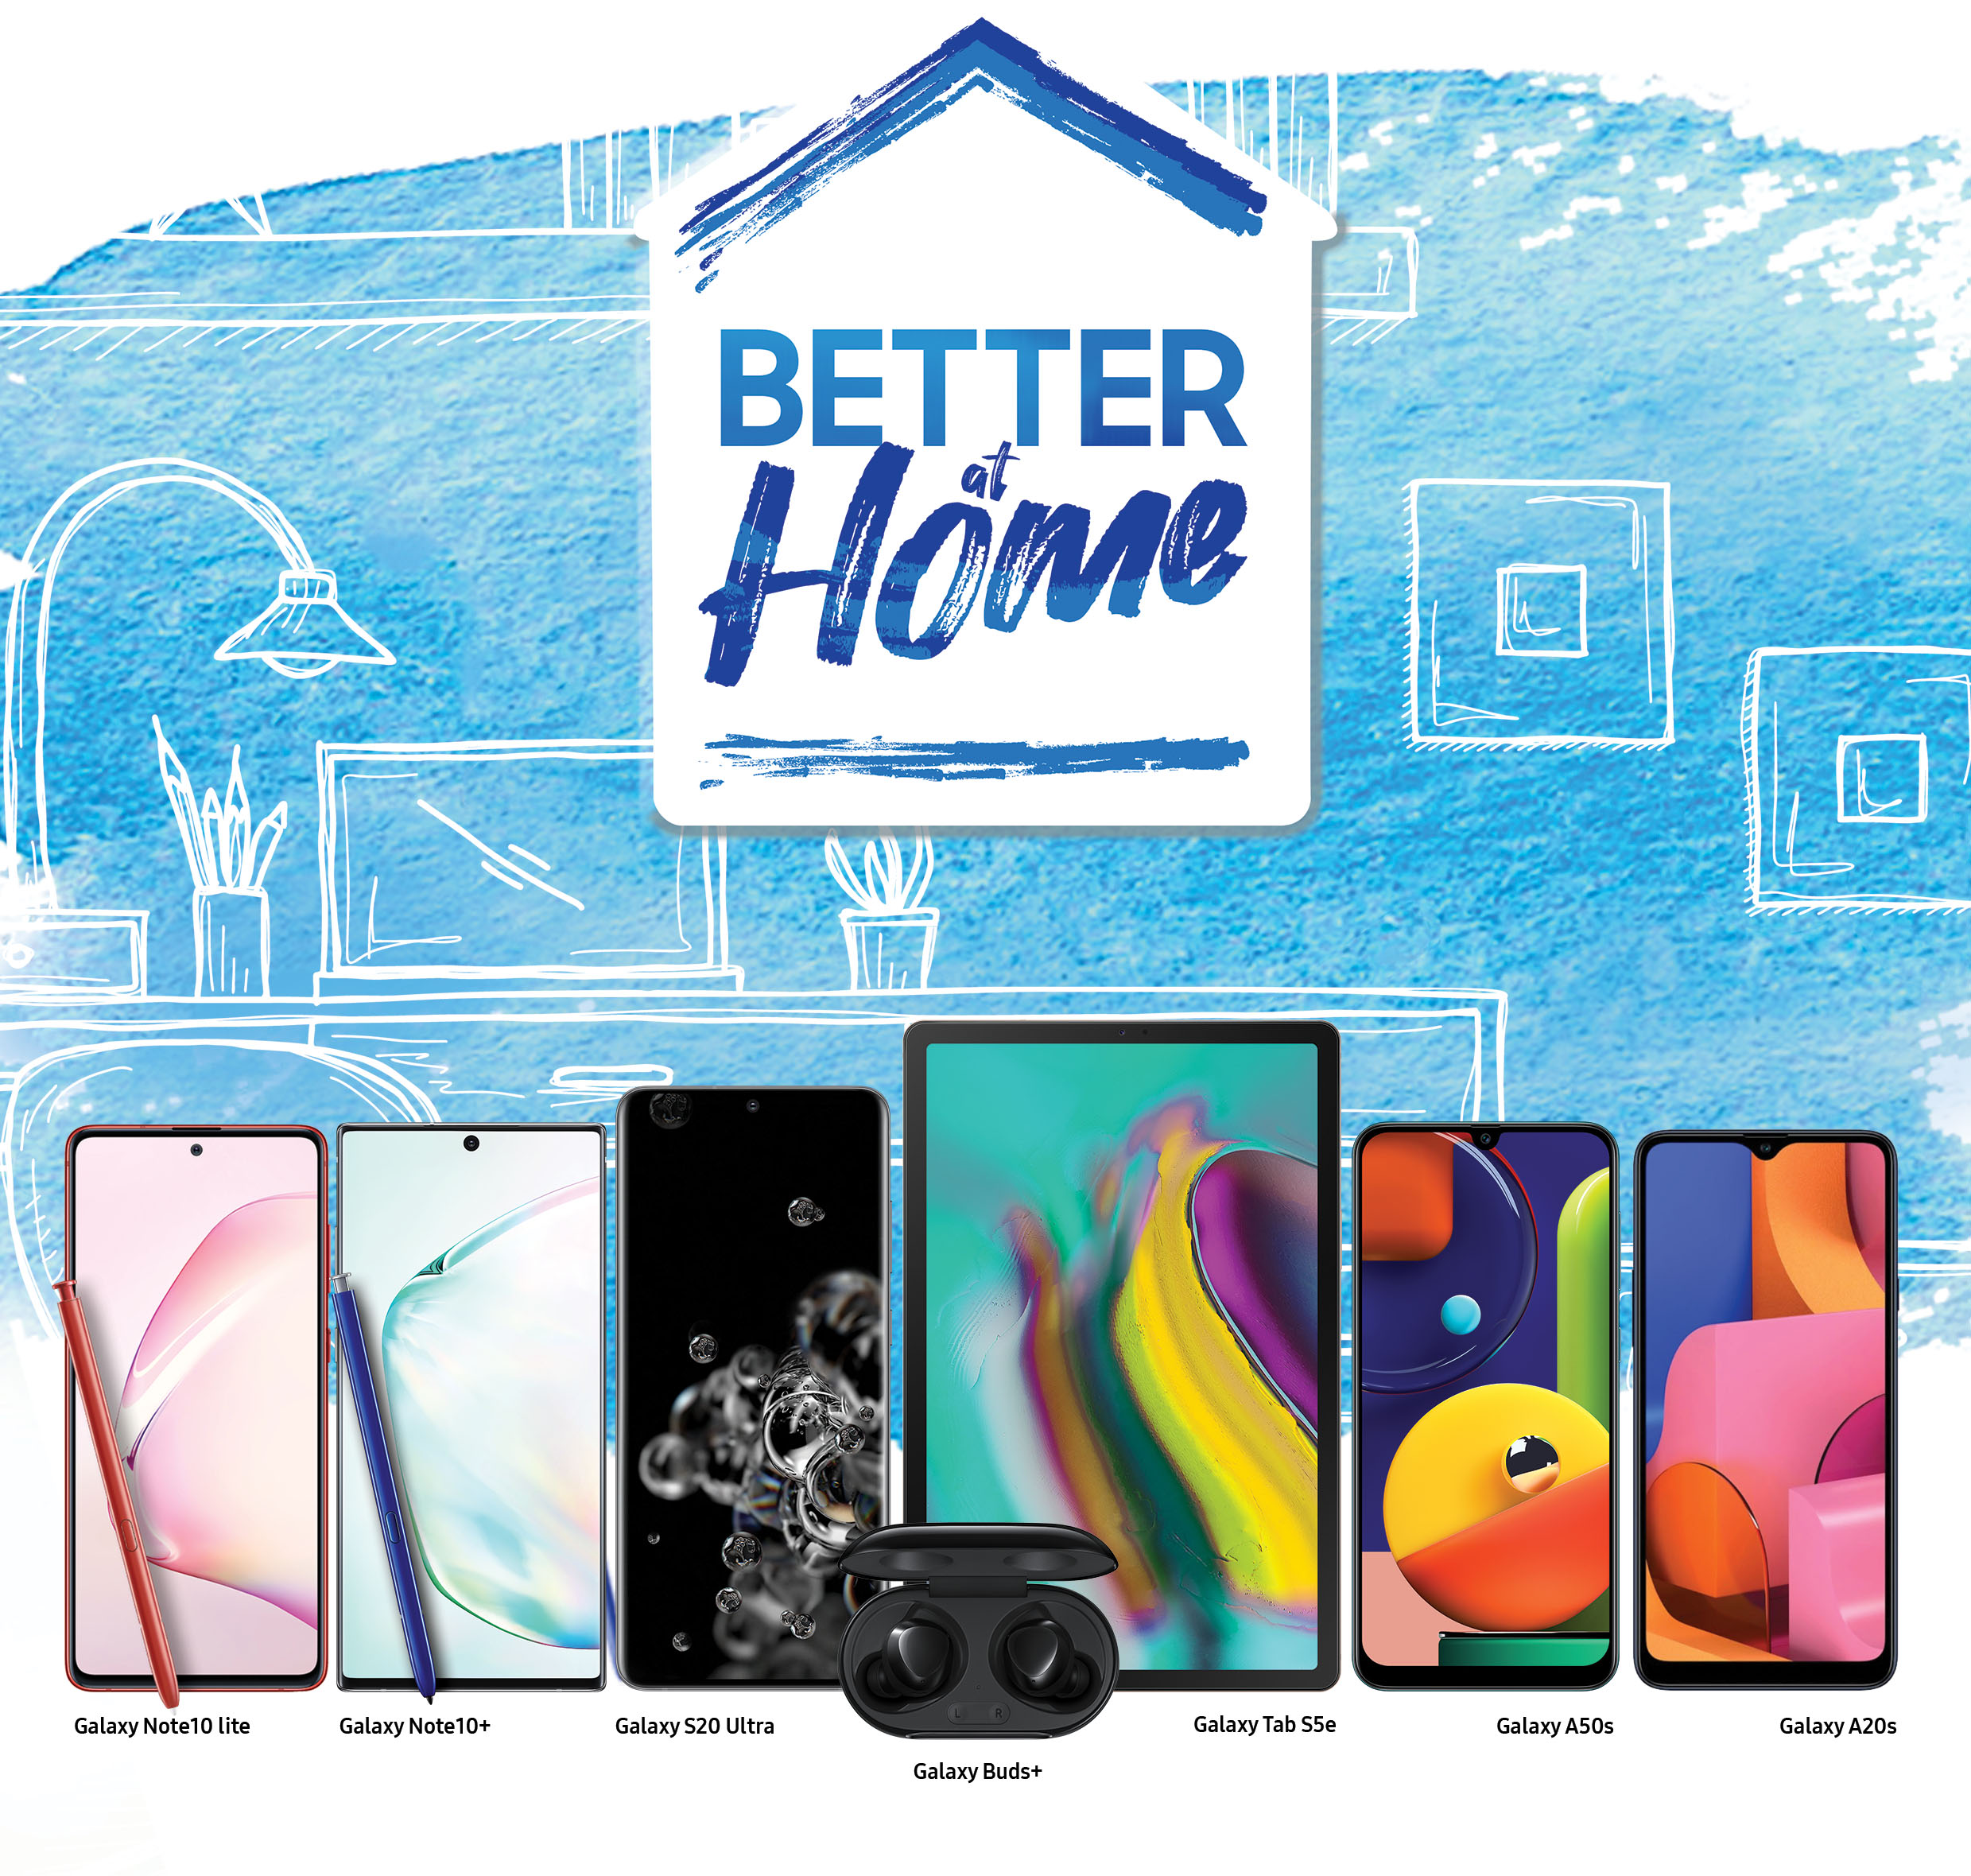 Stay connected and productive Samsung’s “Better at Home” promo